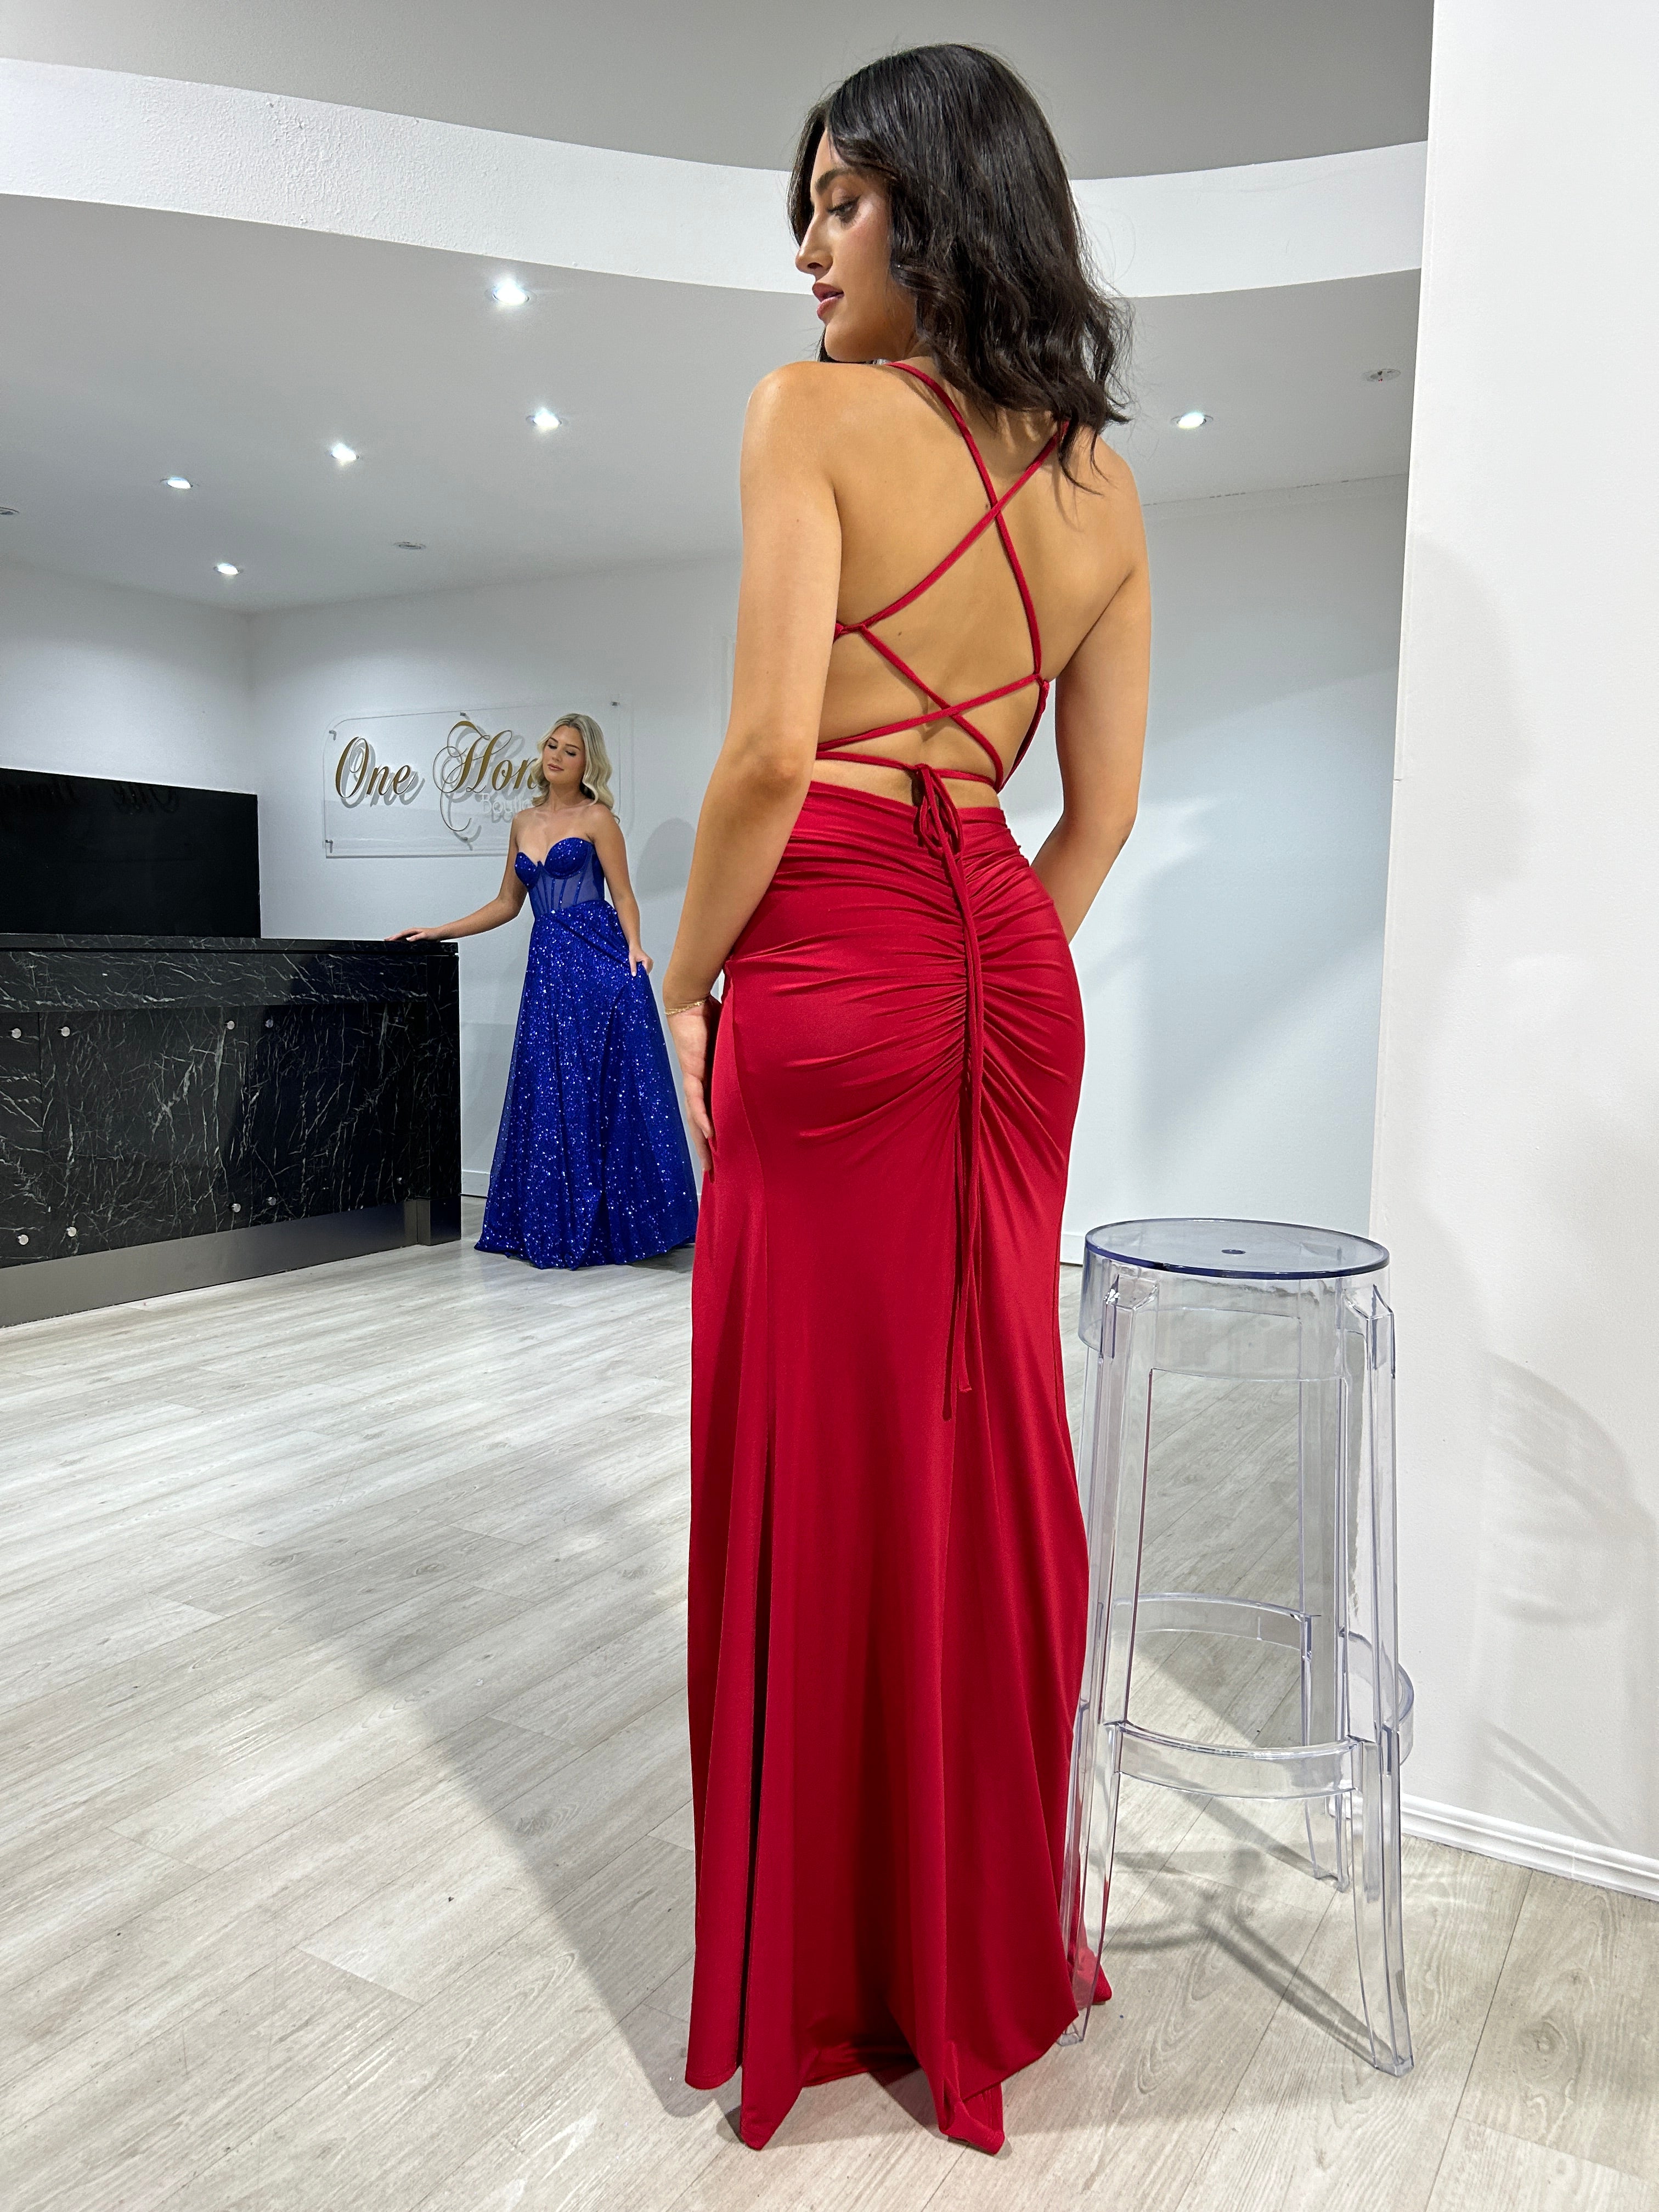 Honey Couture ELODIE Deep Red Silky Lace Up Low Back Mermaid Formal Dress